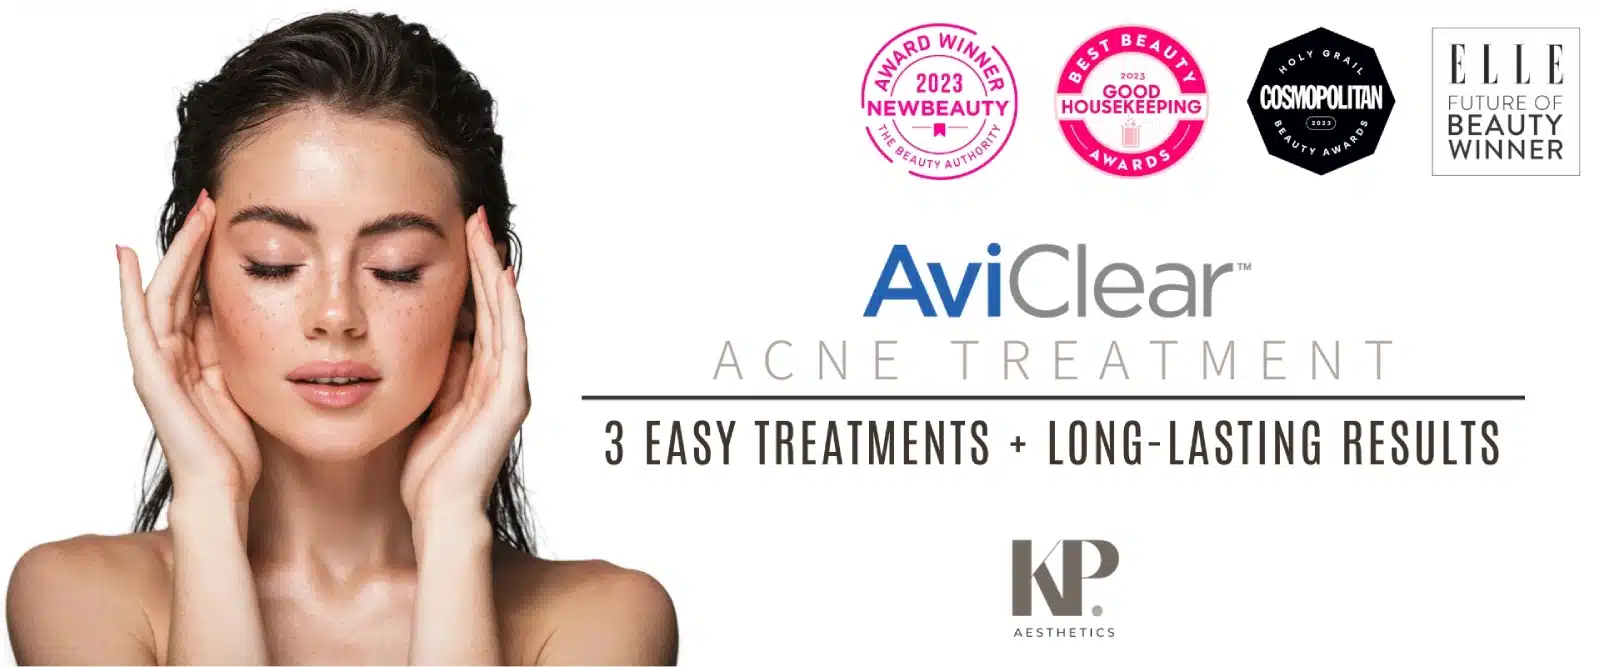 AviClear - Acne Treatment - 3 Easy Treatments + Long-lasting Results - KP Aesthetics